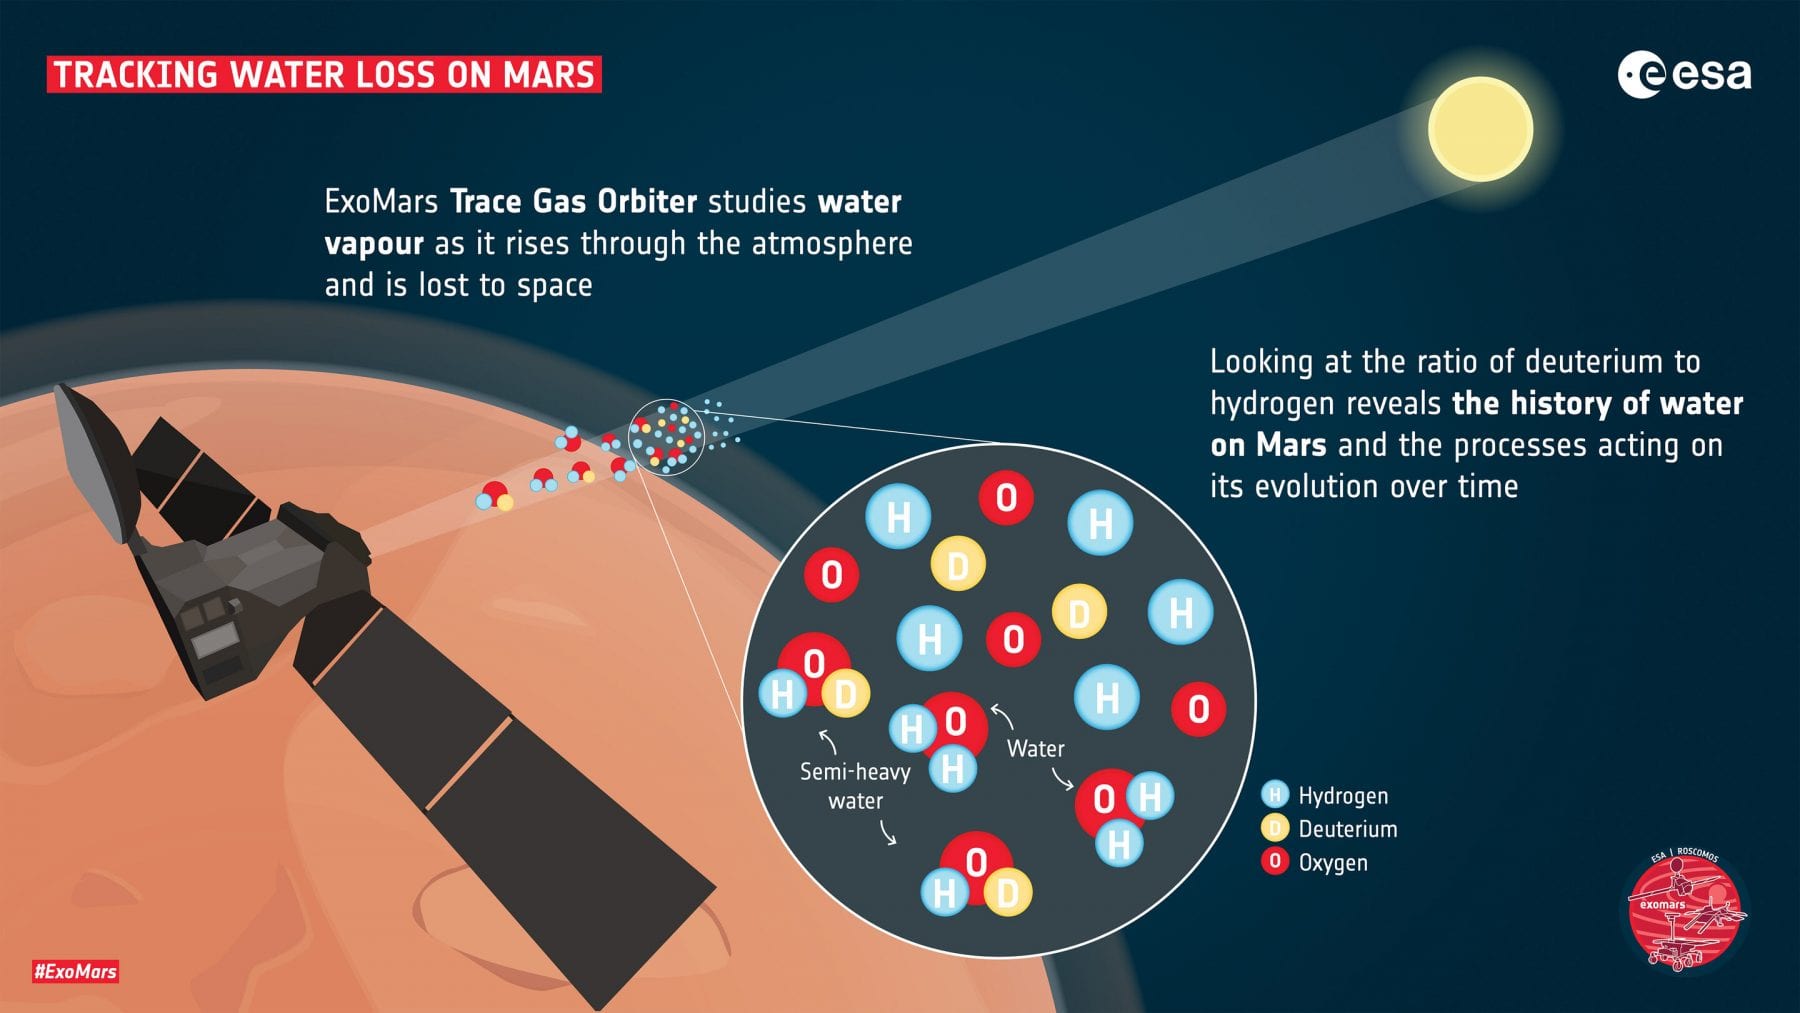 Here's how ExoMars searches for water vapor from Mars's orbit. Credit: ESA